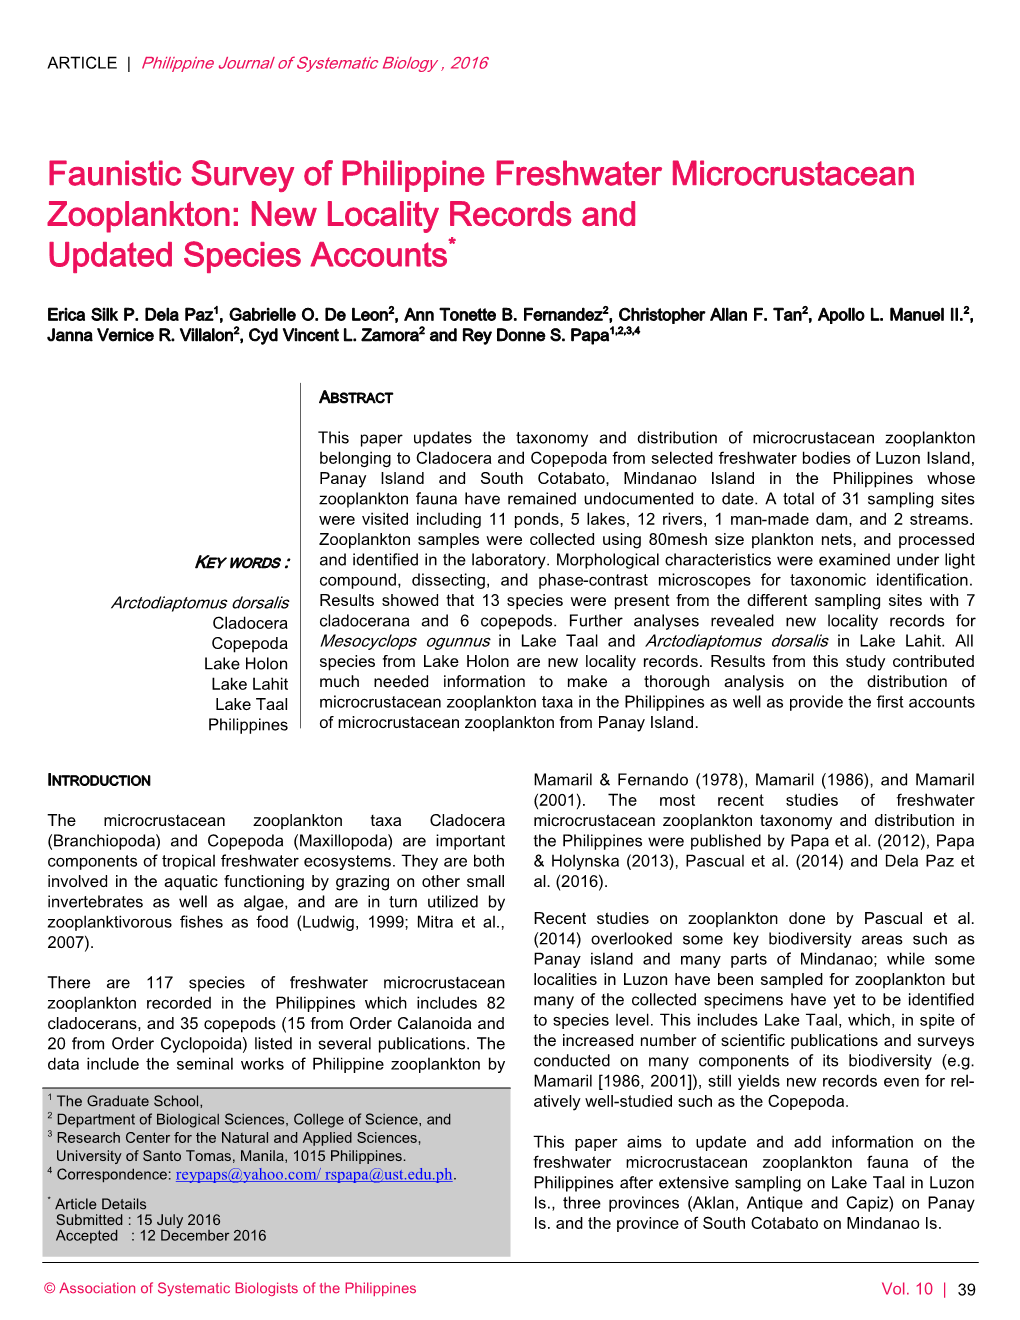 Faunistic Survey of Philippine Freshwater Microcrustacean Zooplankton: New Locality Records and Updated Species Accounts*